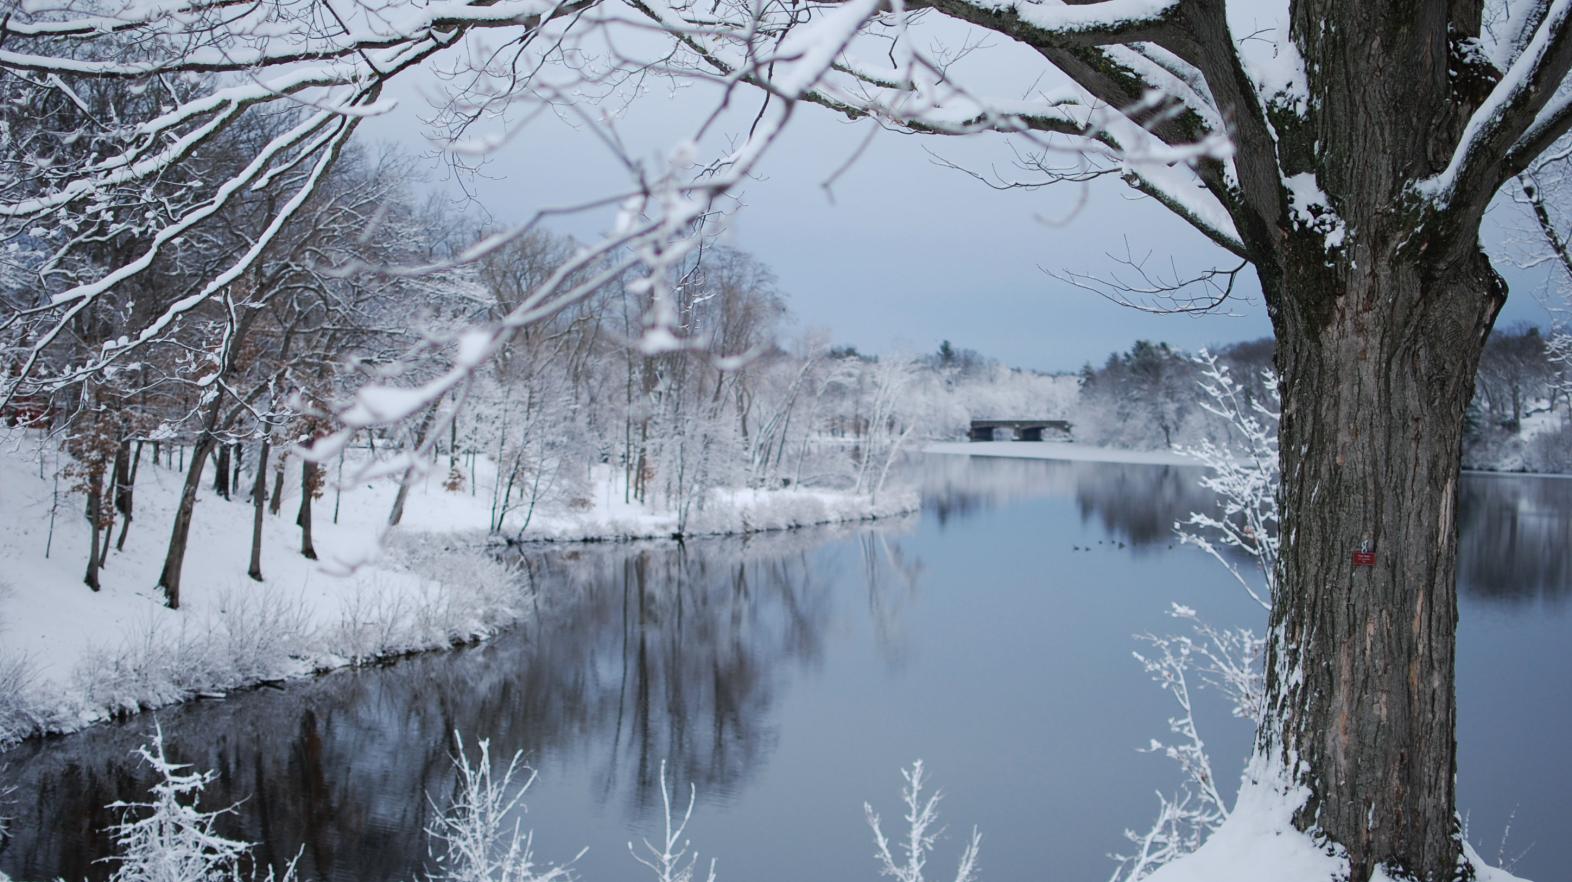 Springfield College student Bryttnie Thomas had no trouble making winter look appealing with this photo of a snowy Lake Massasoit